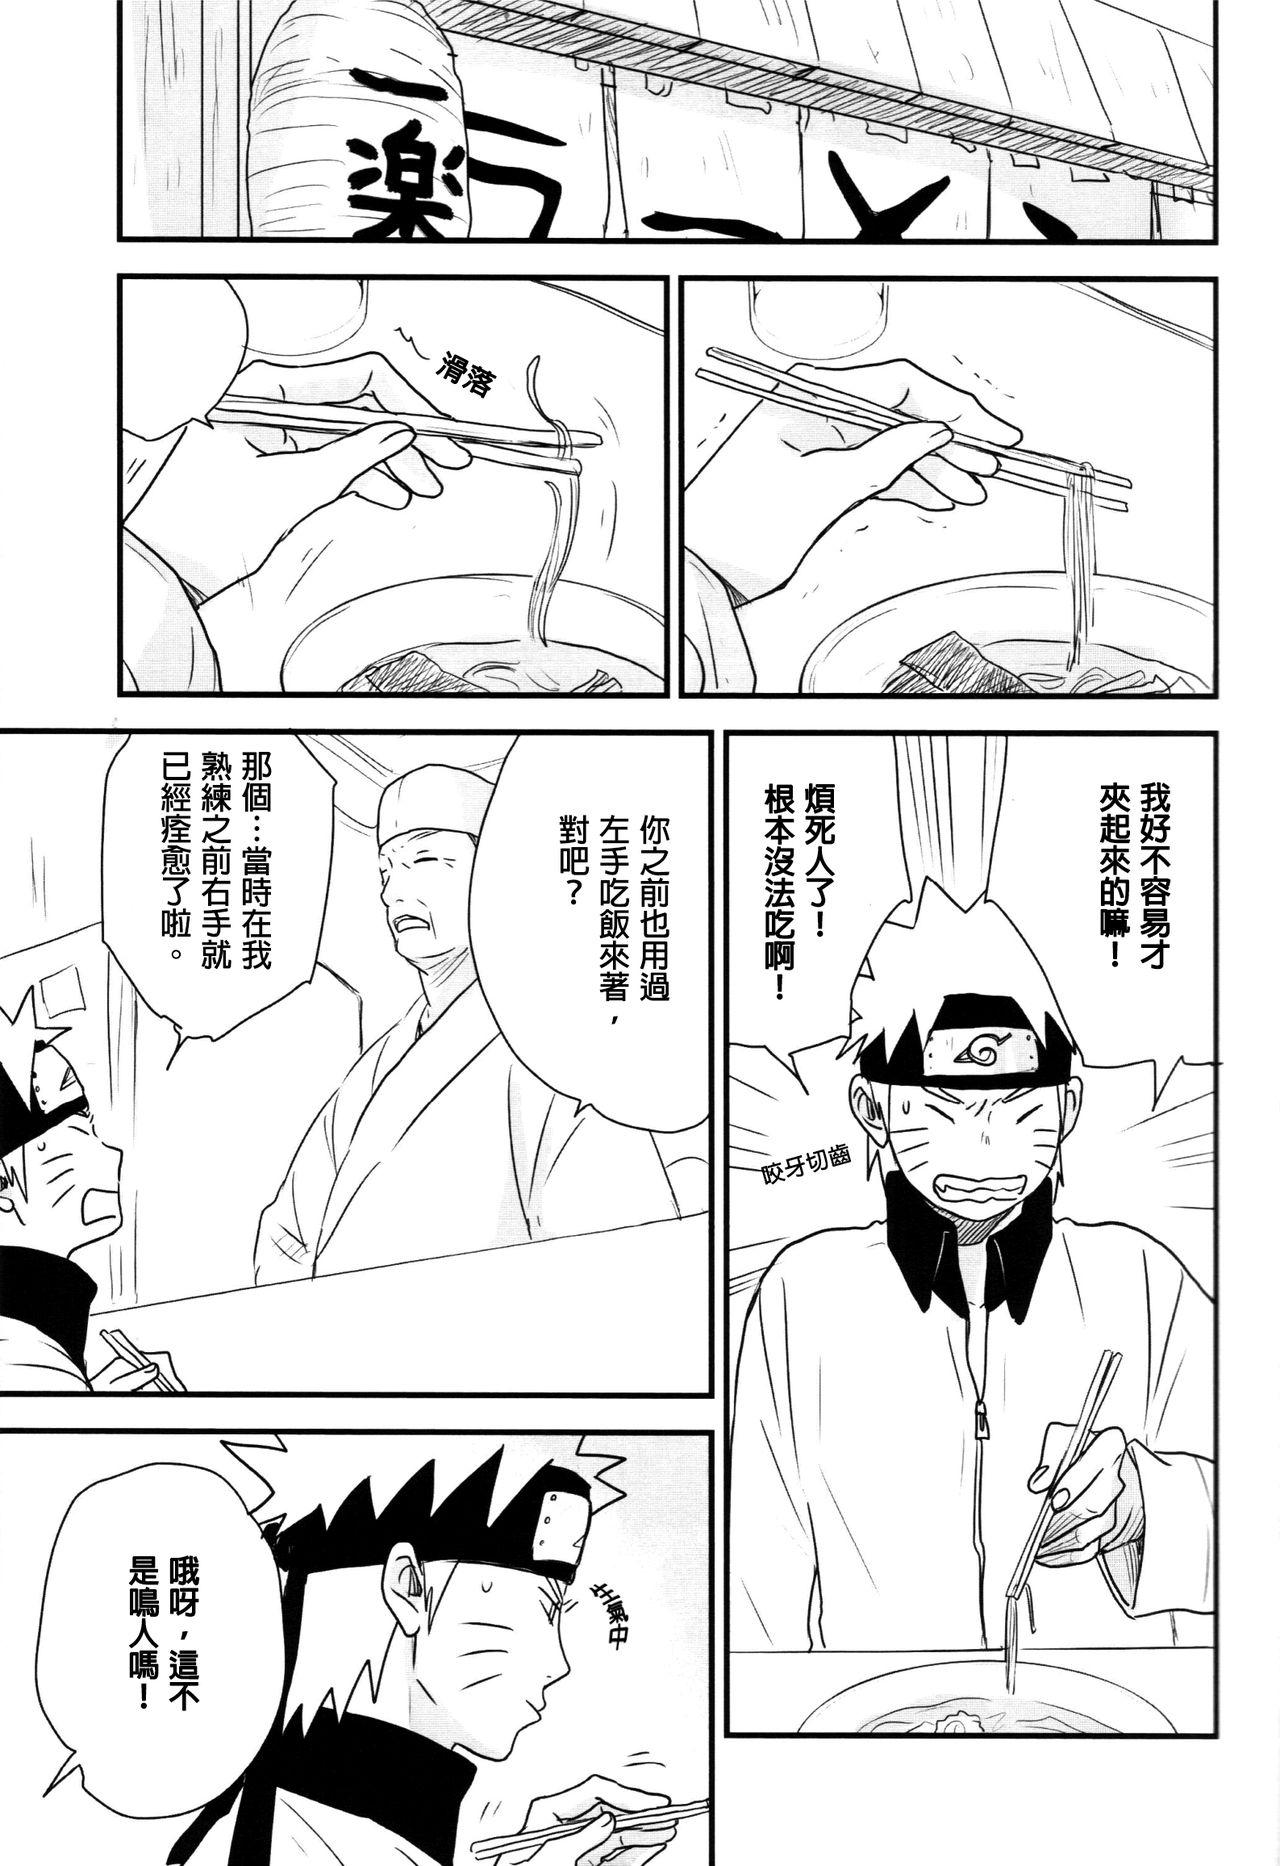 Hardcore Porn A Sweet Nightmare - Naruto Rough Sex - Page 8